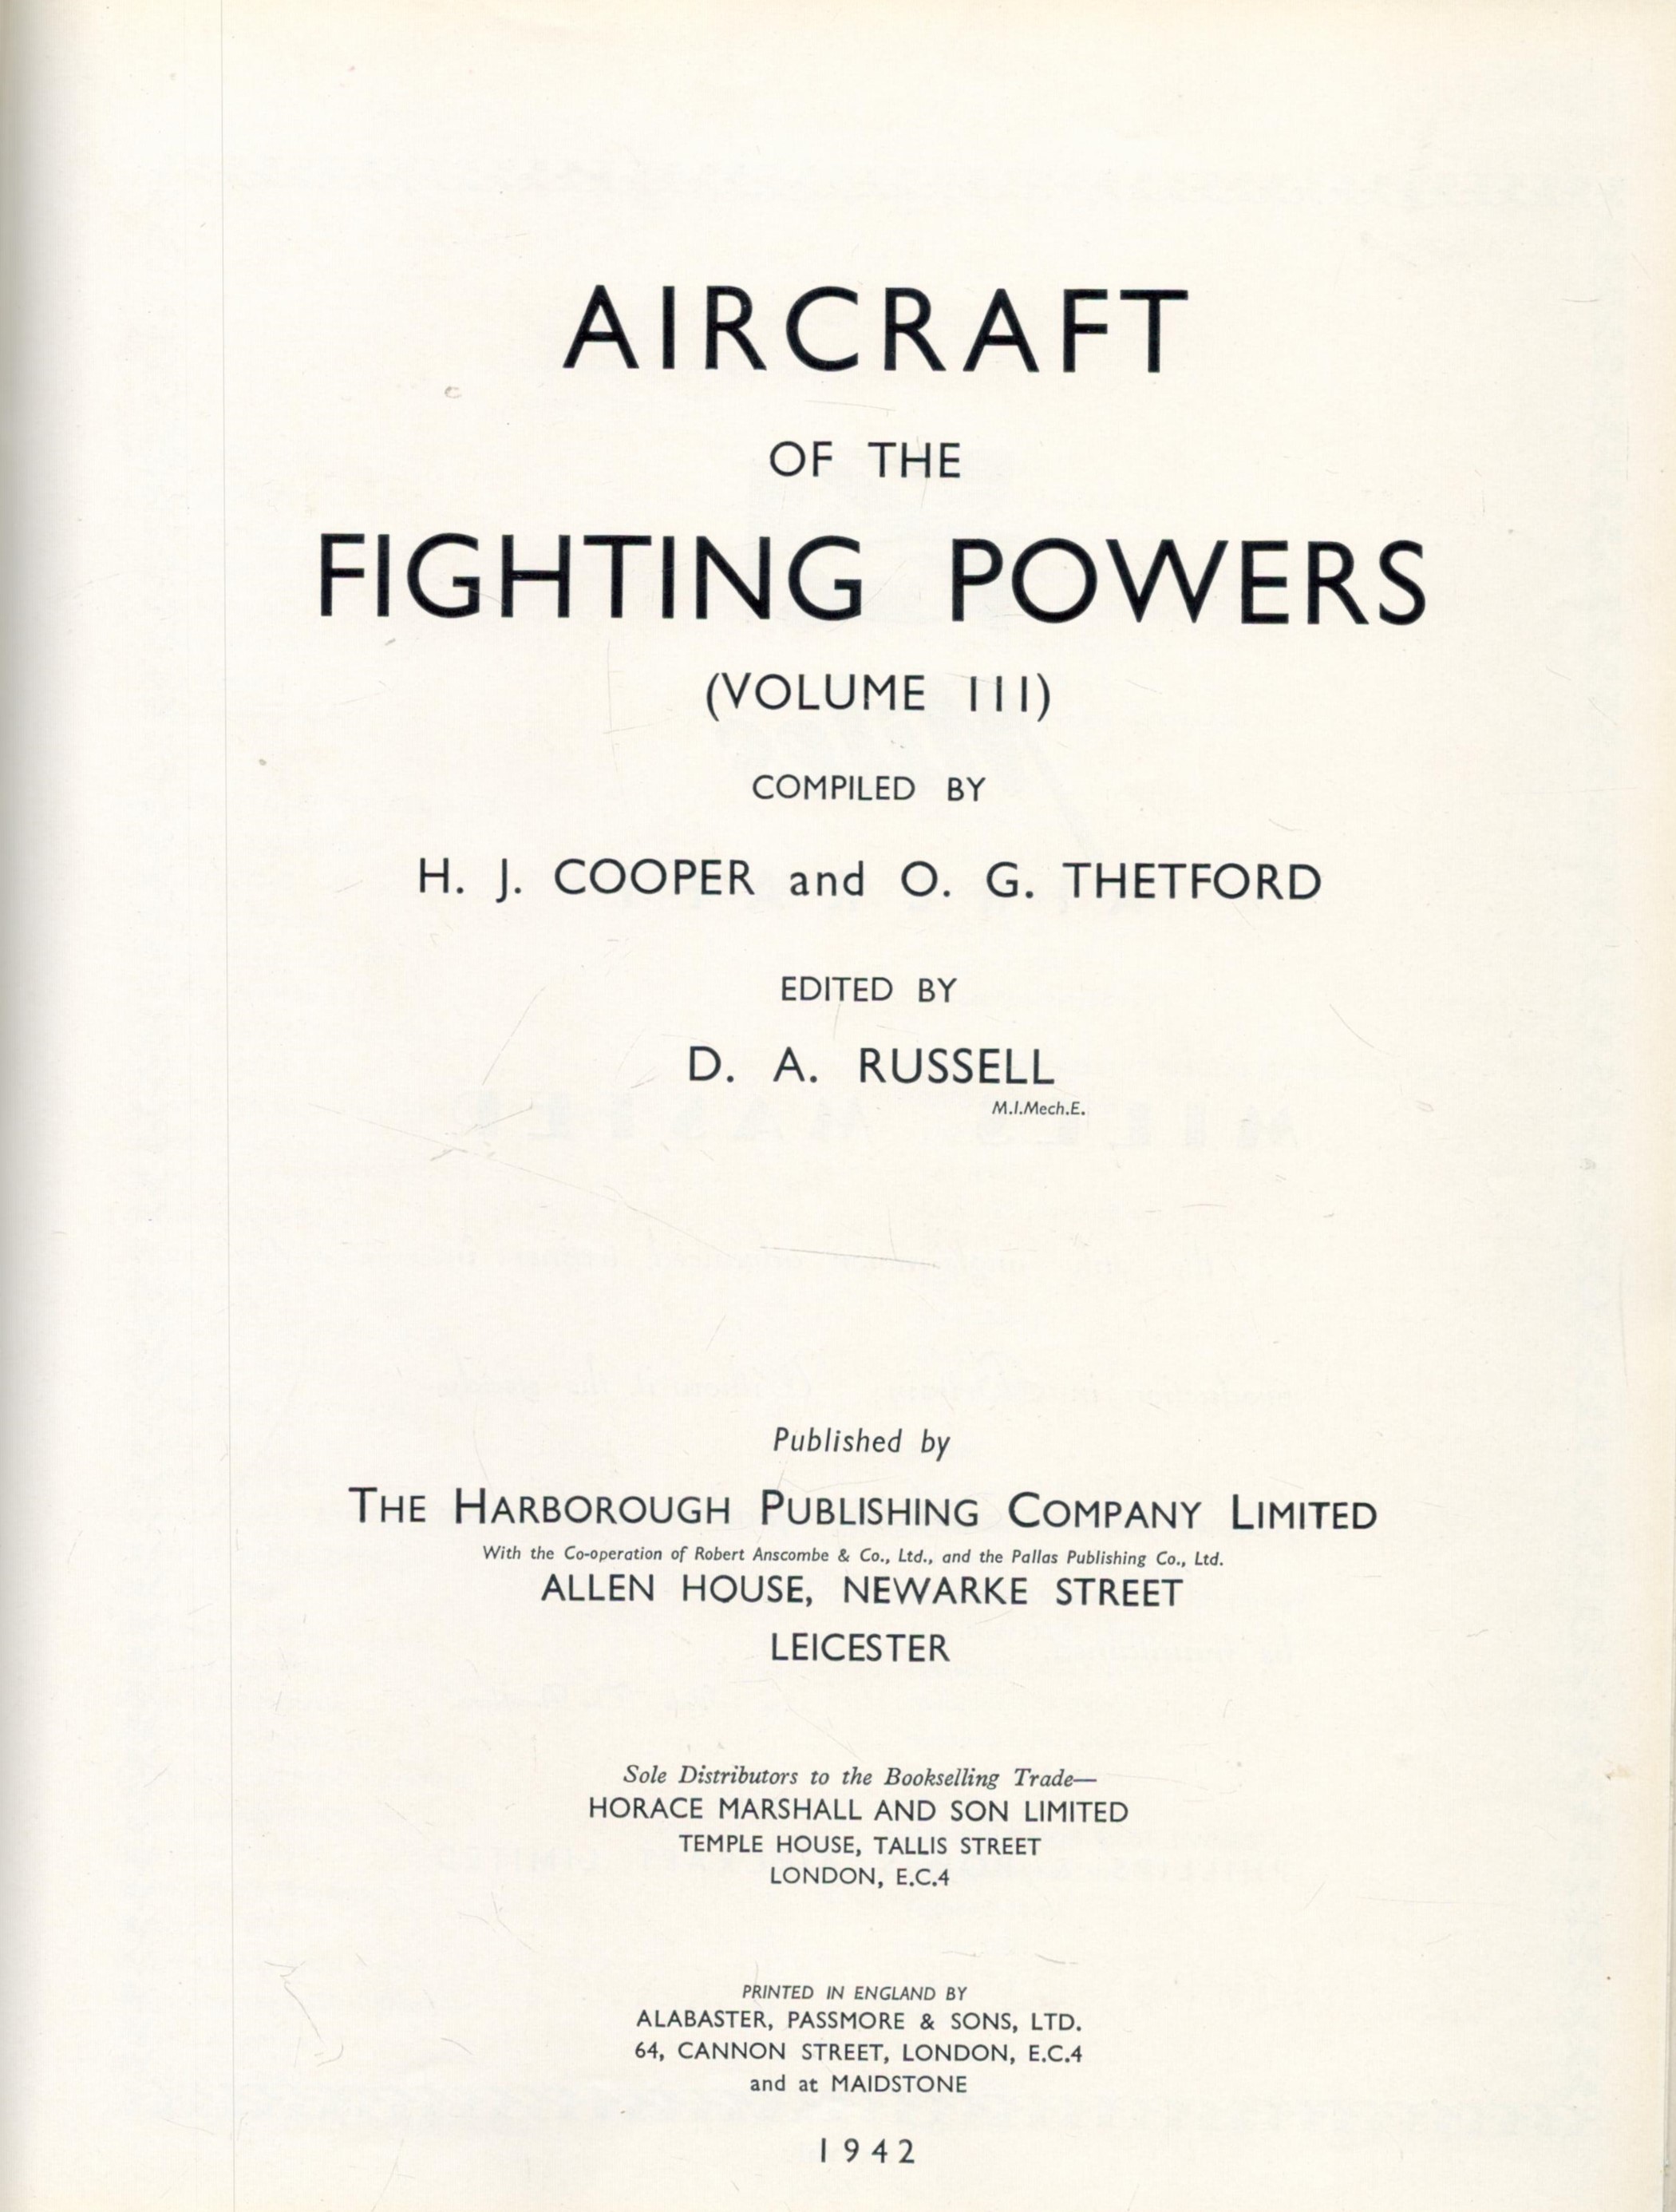 Aircraft of the Fighting Powers vols 1, 2 and 3 compiled by H J Cooper and O G Thetford 1942 First - Image 4 of 4